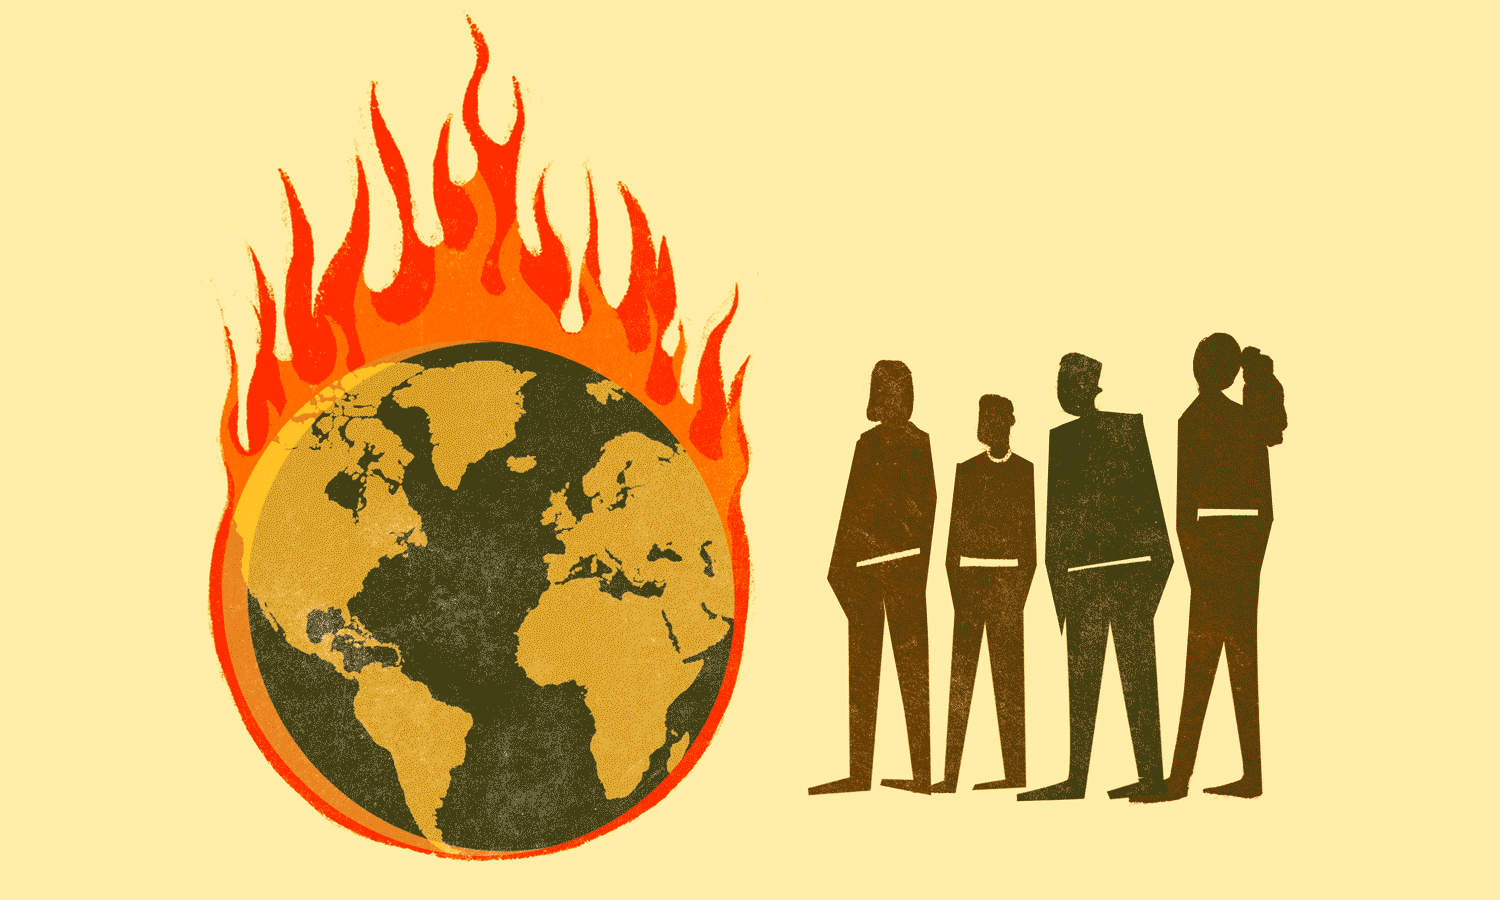 Bill McKibben: This Climate Strike Is Part of the Disruption We Need